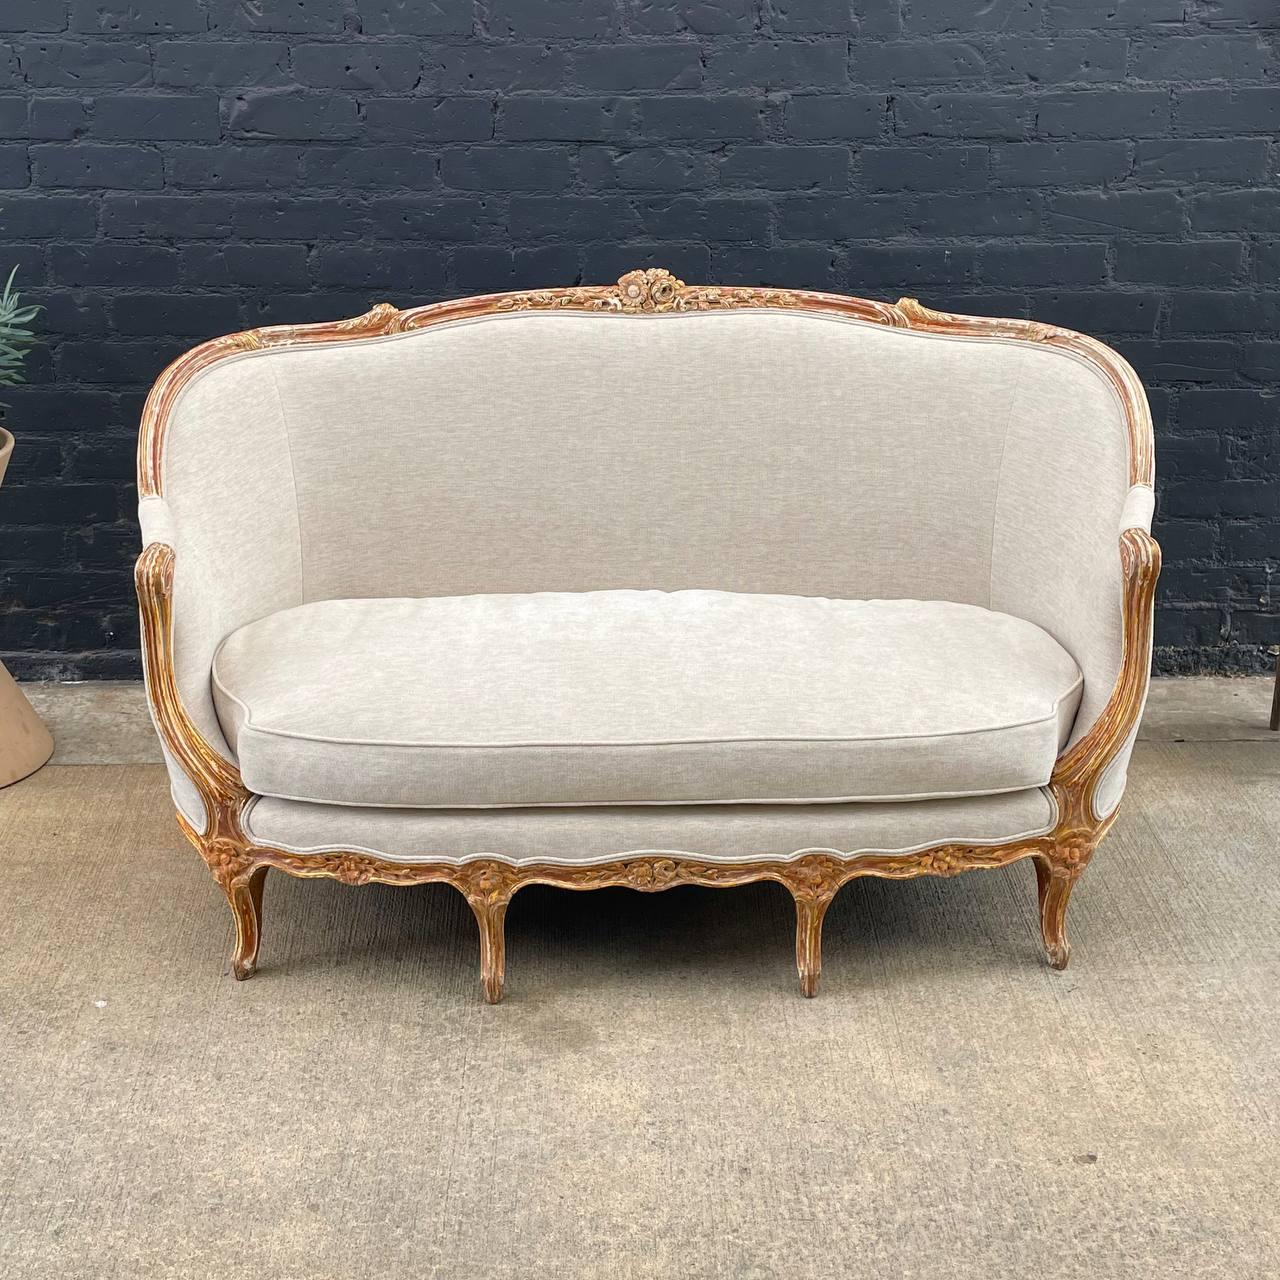 Antique French Louis XVI Sofa with Carved Details In Good Condition For Sale In Los Angeles, CA